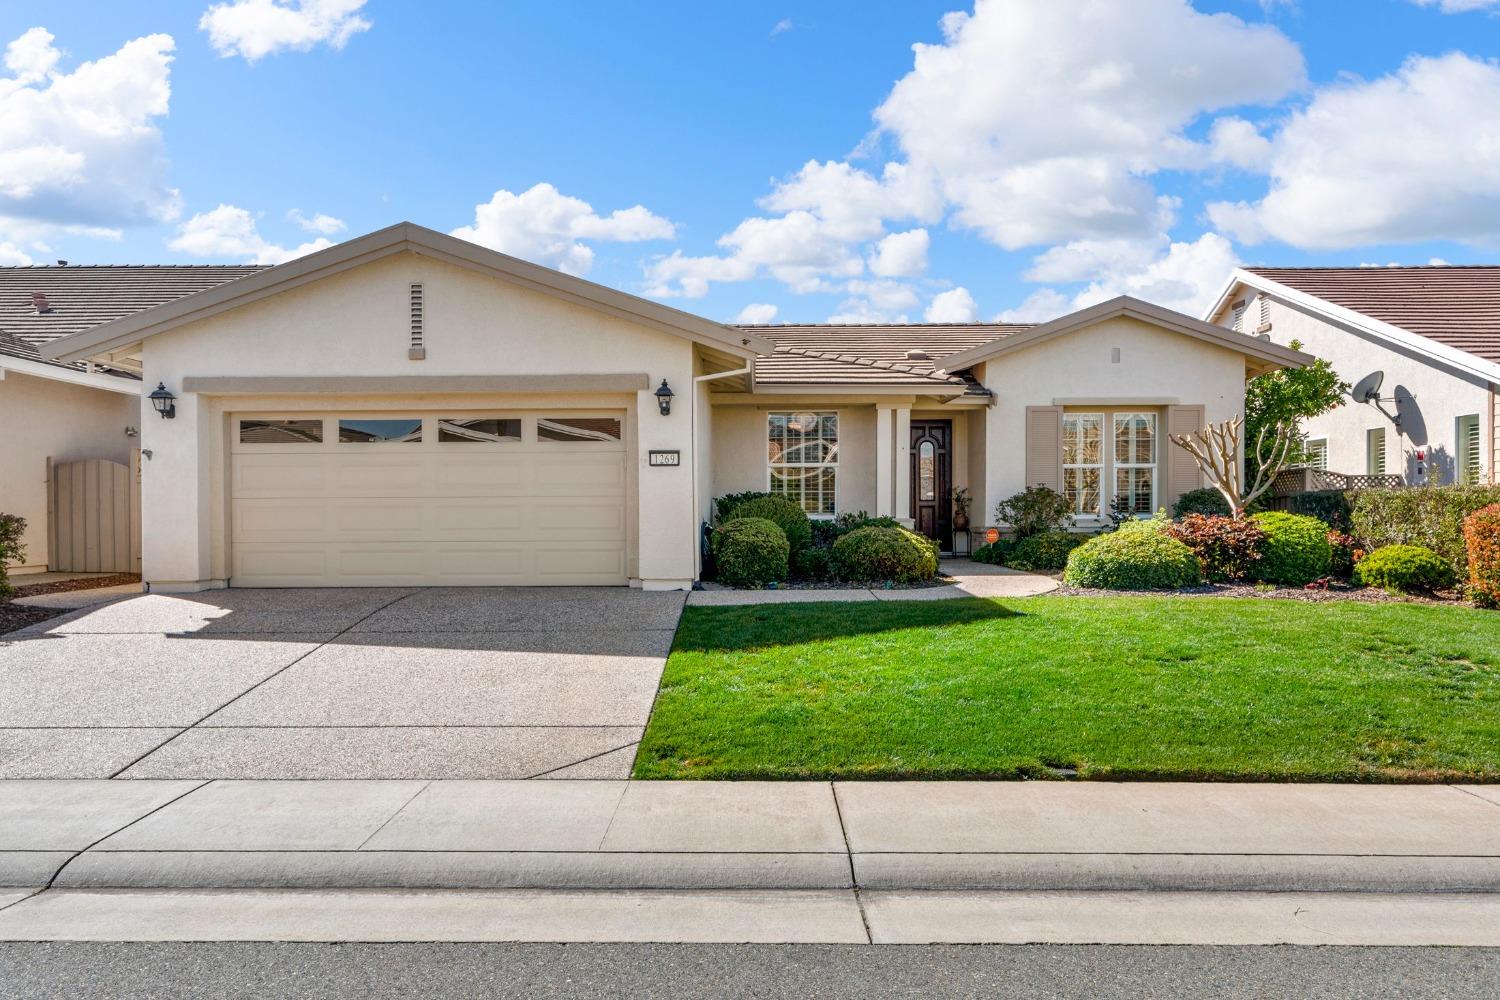 Photo of 1269 Longhorn Ln in Lincoln, CA